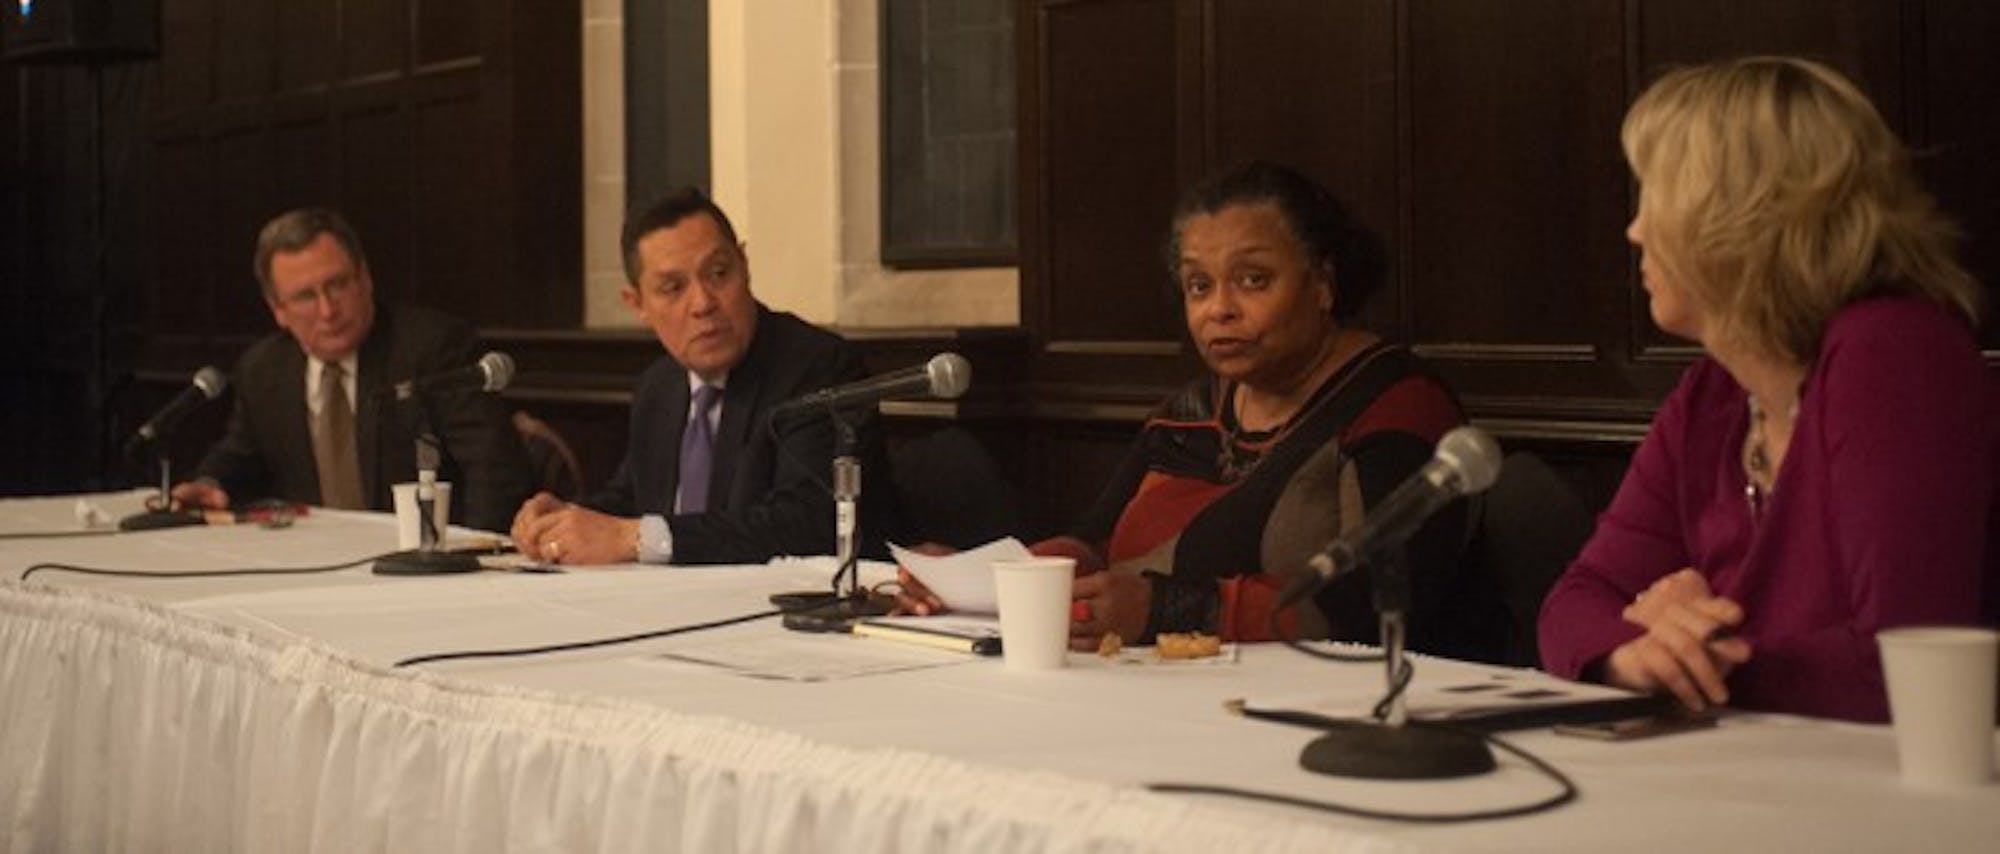 Professors discuss the legacy of Dr. Martin Luther King Jr. in the Oak Room of South Dining Hall Wednesday night as part of Walk the Walk Week. The panelists discussed contemporary racial tensions.